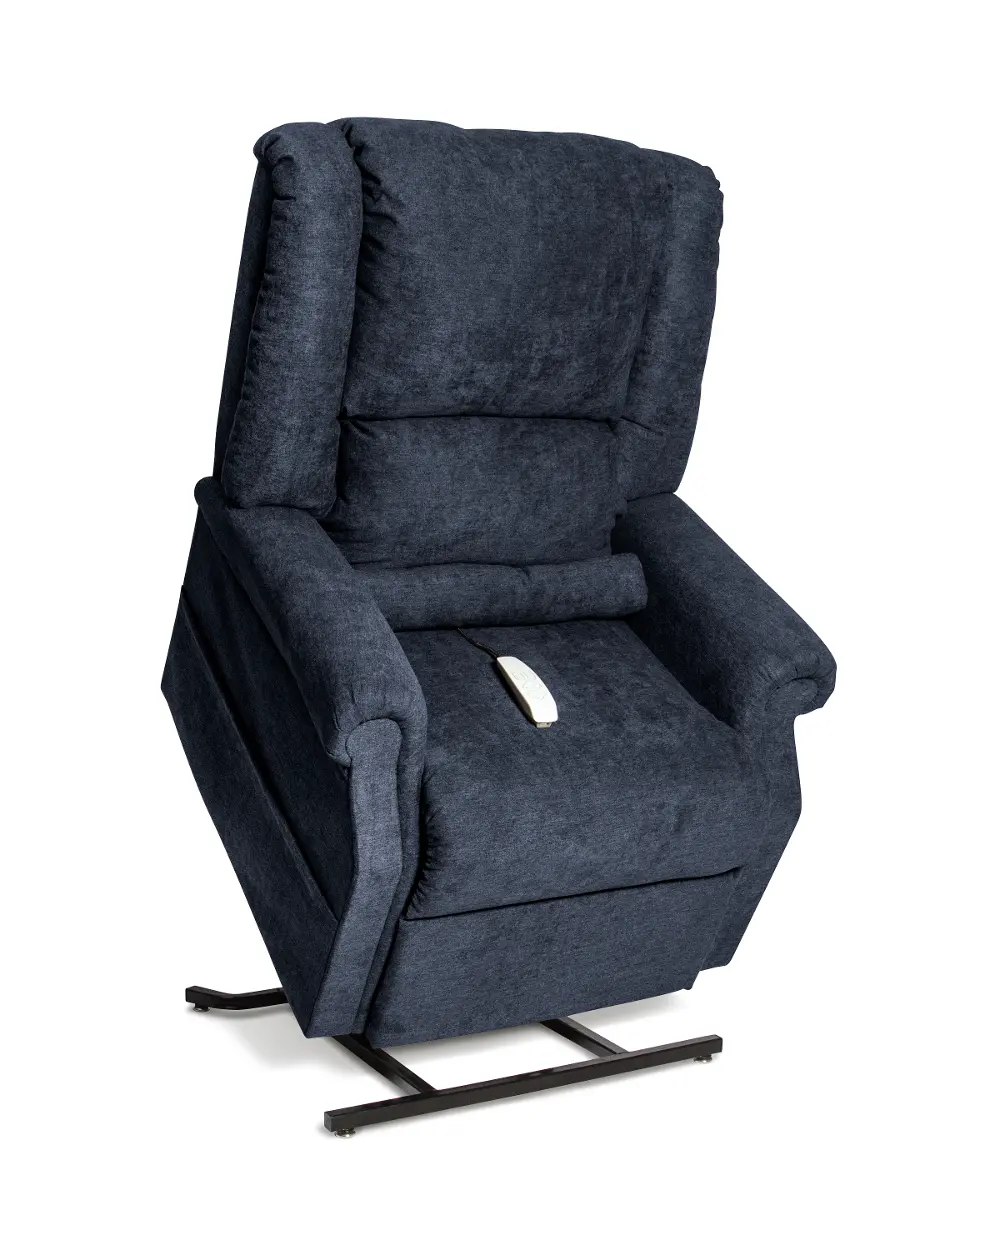 Navy Infinite Position Reclining Lift Chair -1